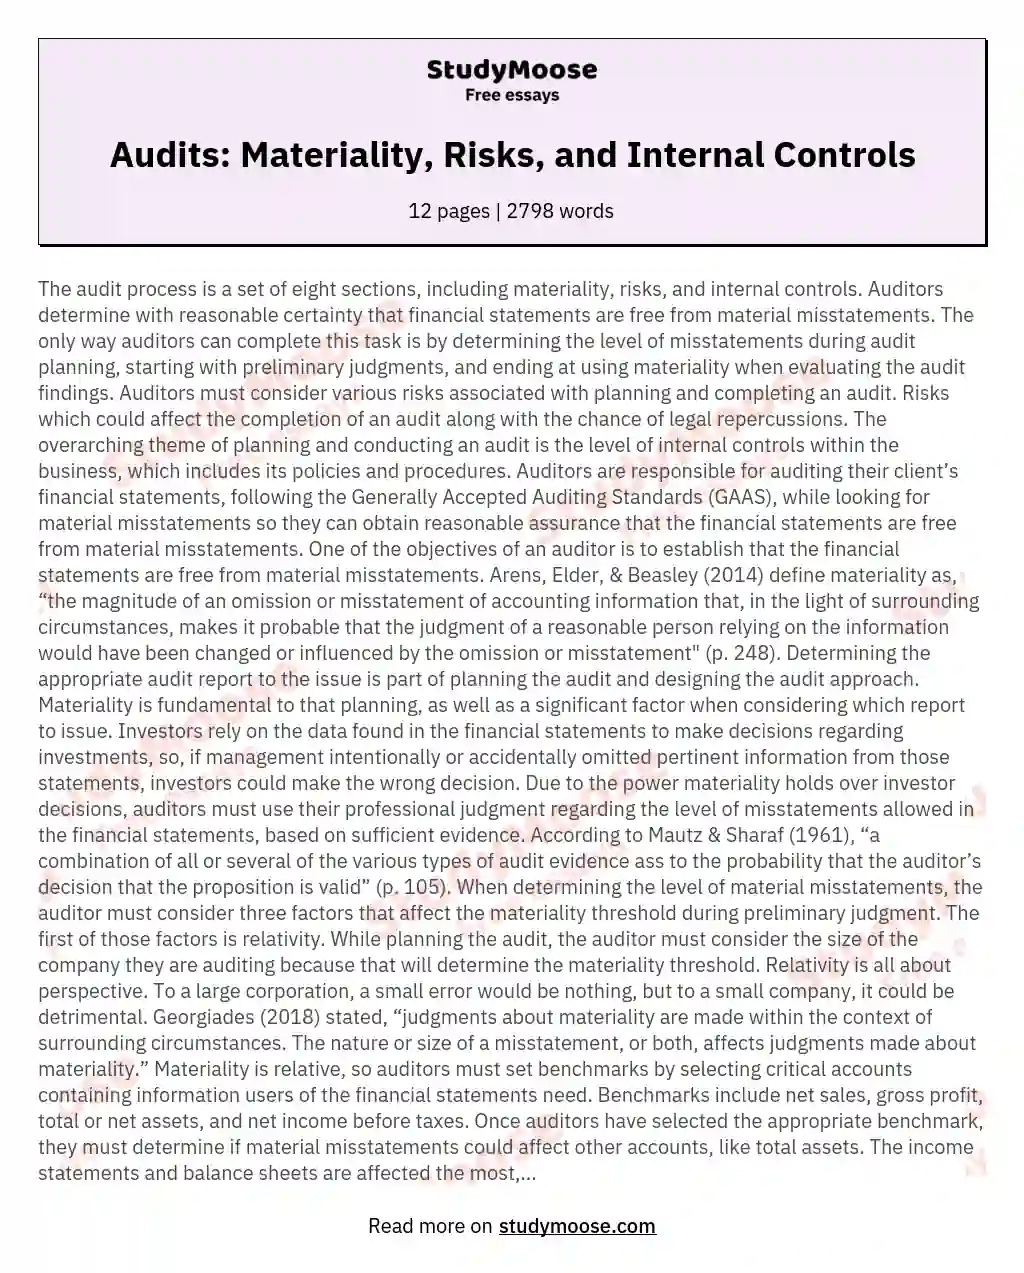 Audits: Materiality, Risks, and Internal Controls essay